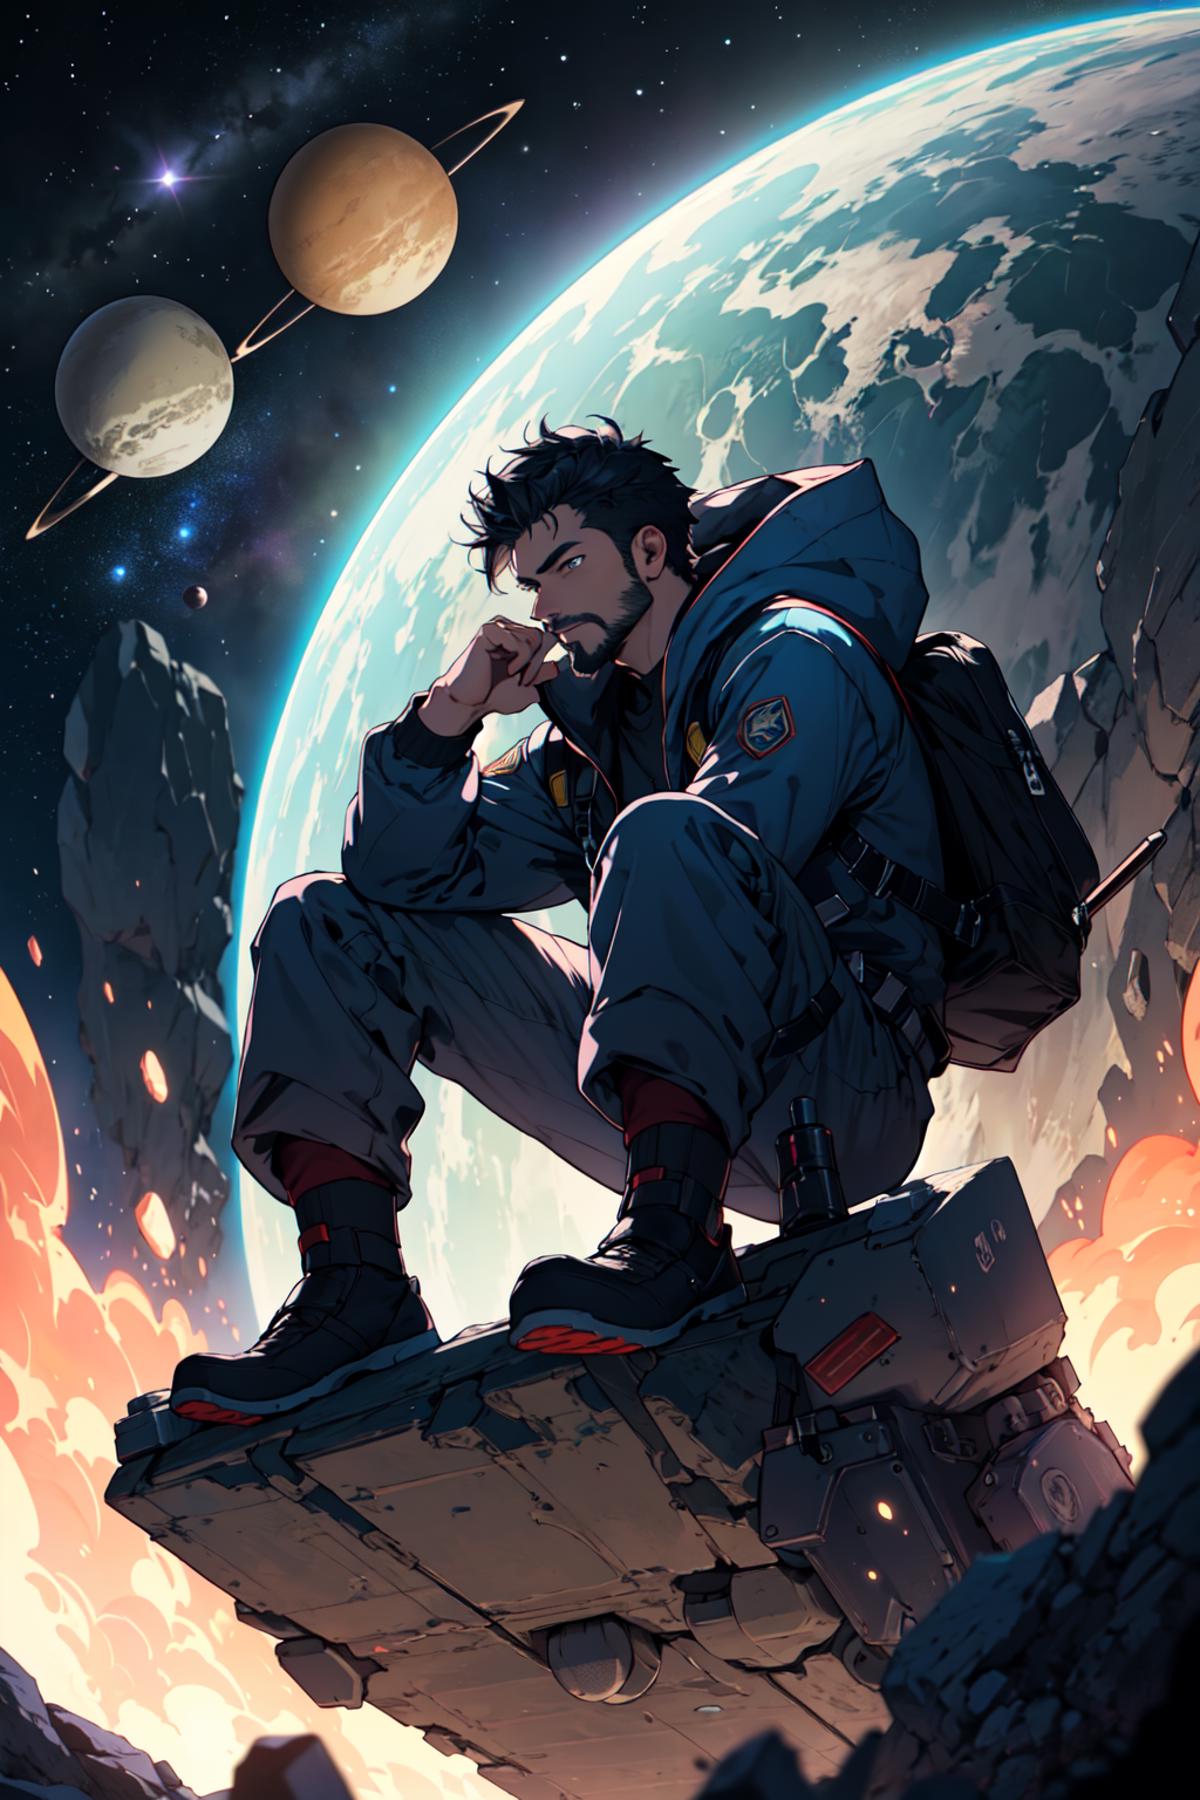 Draw a young programmer, sitting on a research platform floating in the middle of an asteroid belt. He is studying with a ...